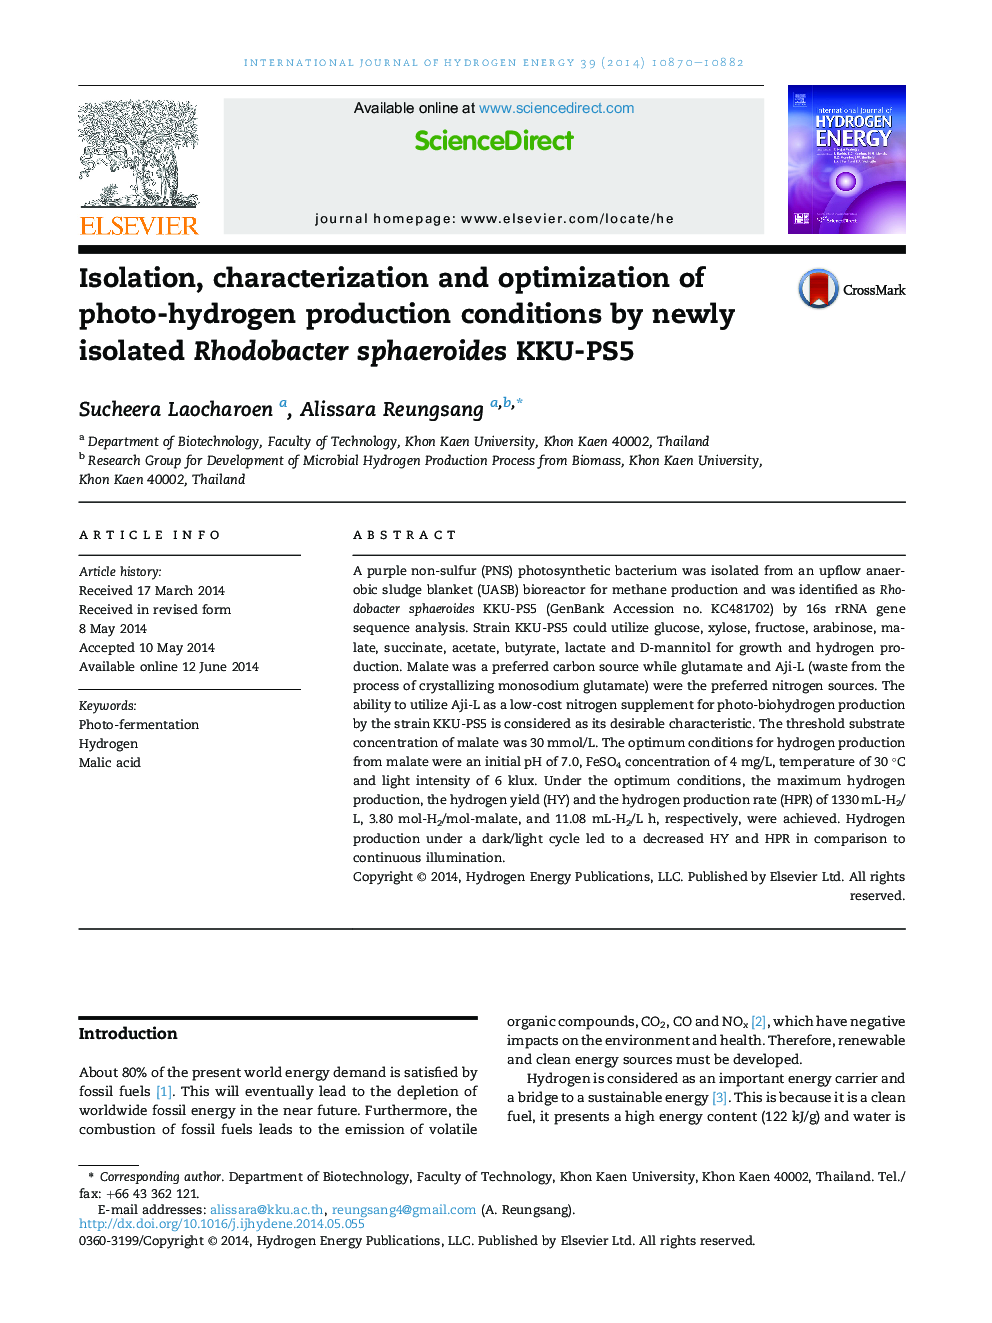 Isolation, characterization and optimization of photo-hydrogen production conditions by newly isolated Rhodobacter sphaeroides KKU-PS5